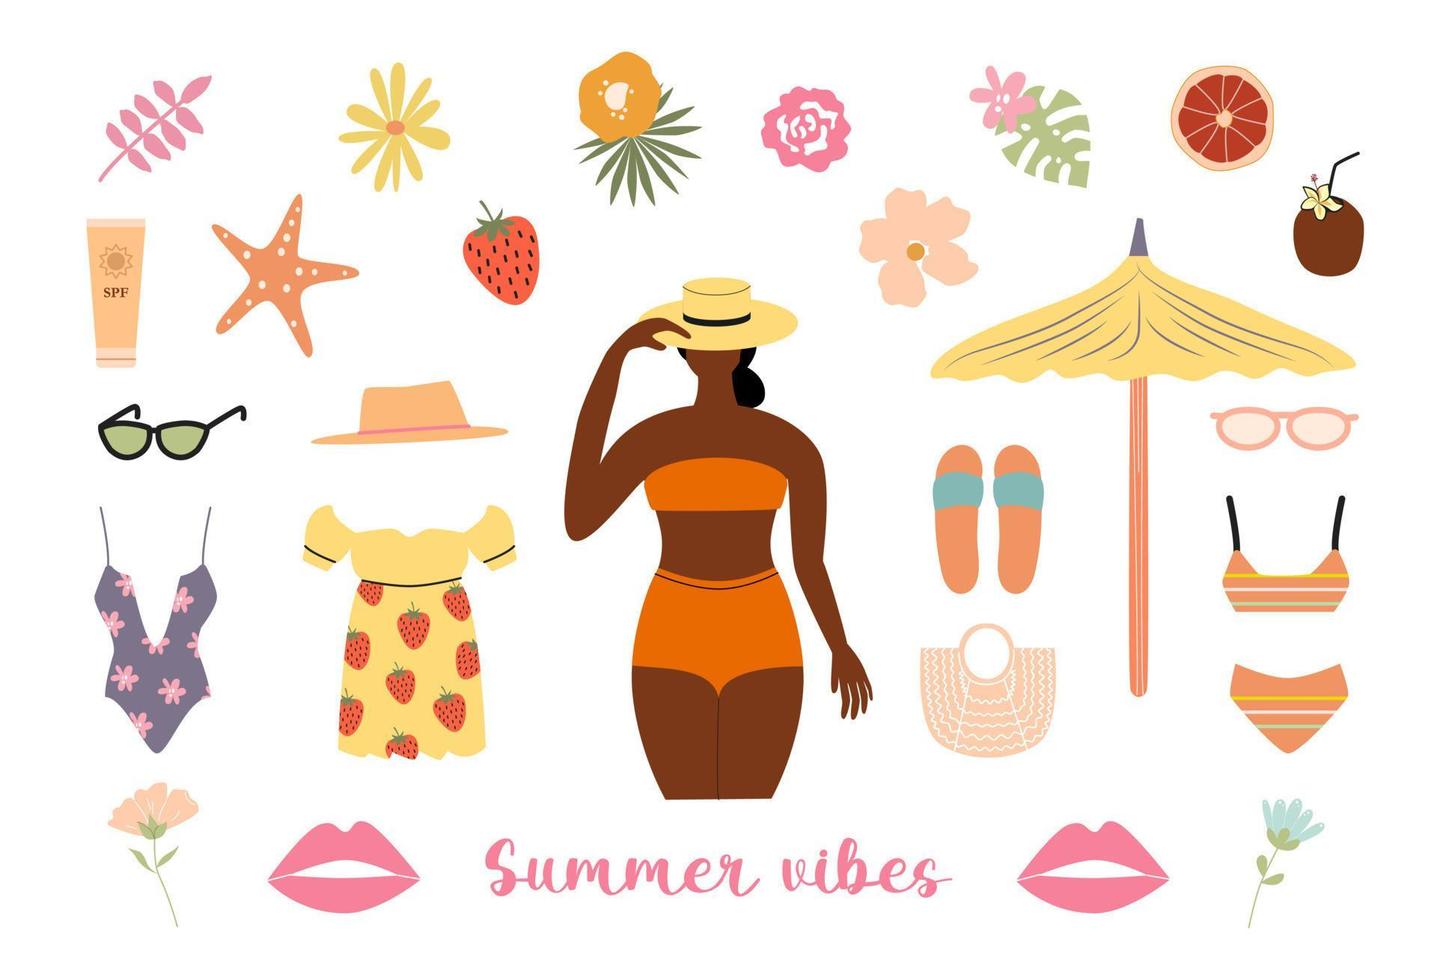 Big summer vector clipart. Summer beach accessories. Tanned girl in bikini and hat. Beach umbrella, bikini, swim wear, flowers, tropical leaves, fruits, cocktail. Summer vibes concept isolated